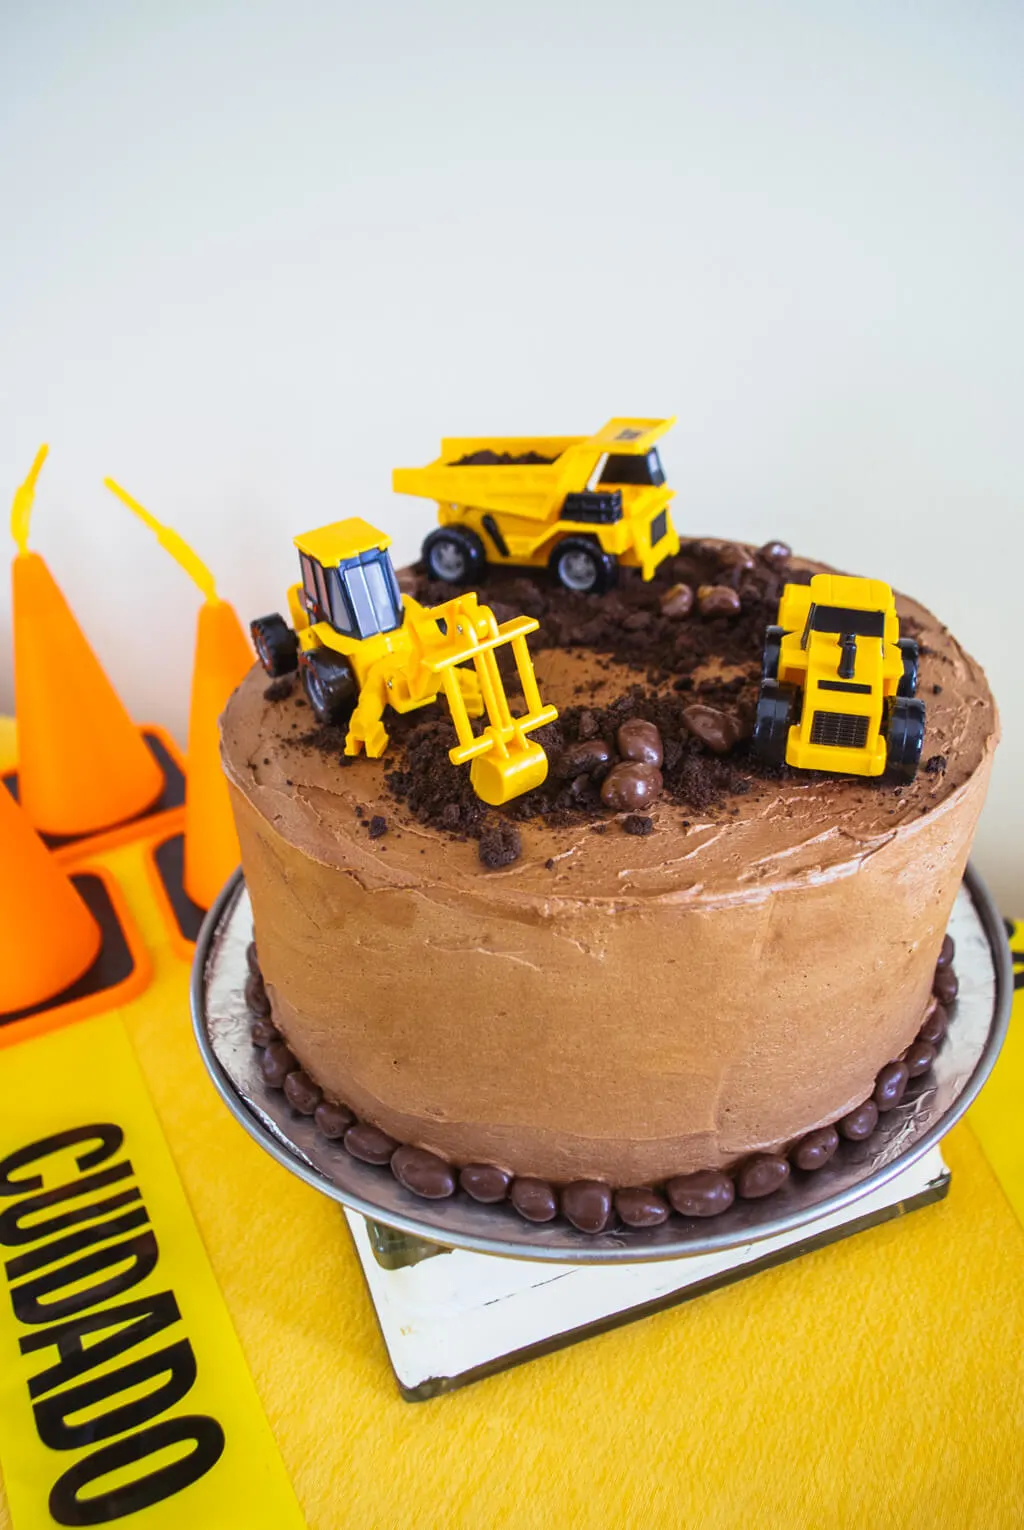 Charli's Cakes - Digger & Tractor Cake 🚜 | Facebook